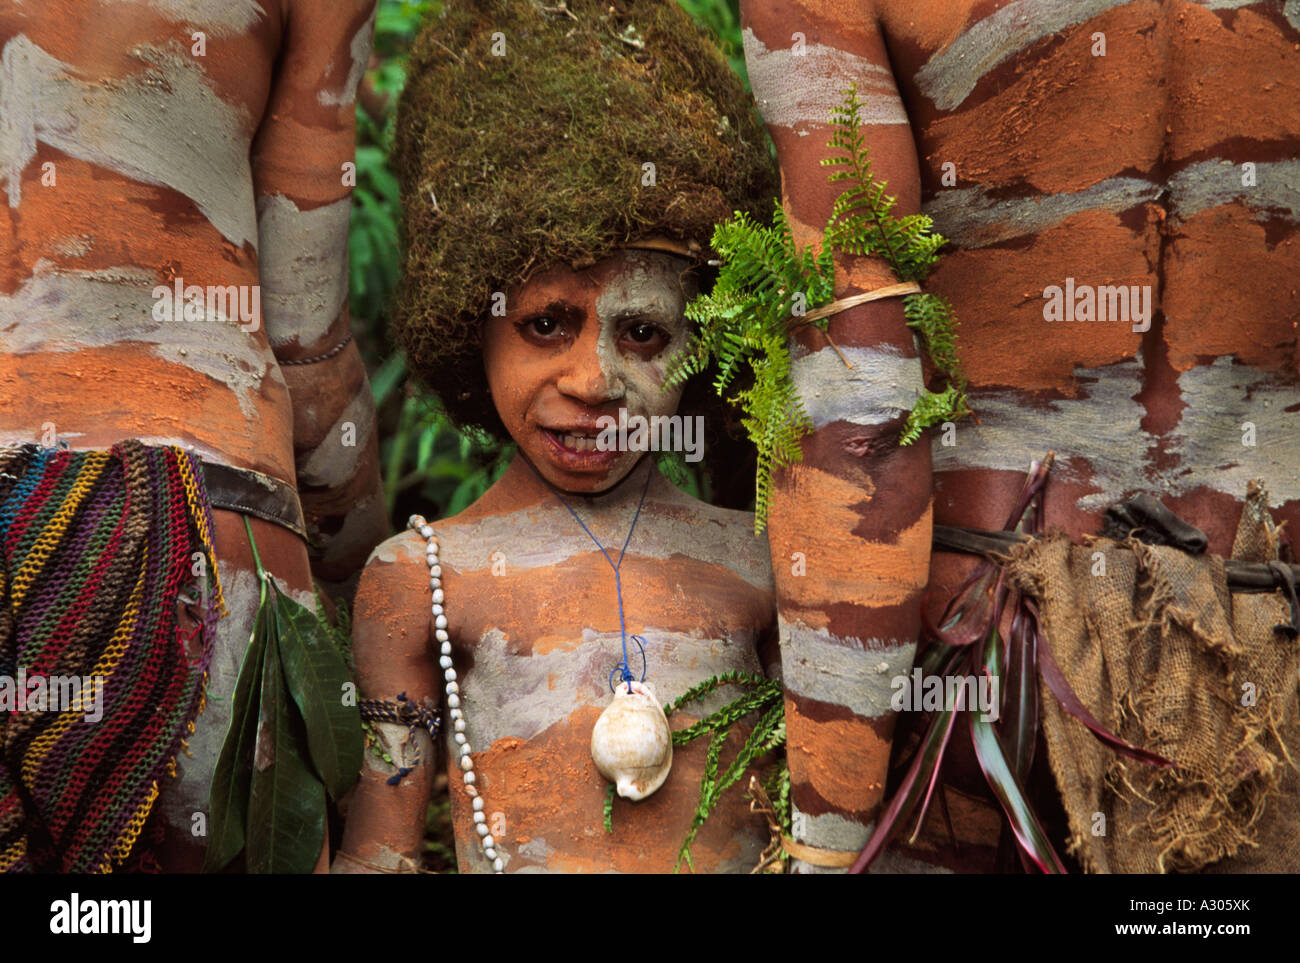 Akeme Mossman tribesboy at the Sing Sing Festival Mt Hagen Papua New Guinea Stock Photo